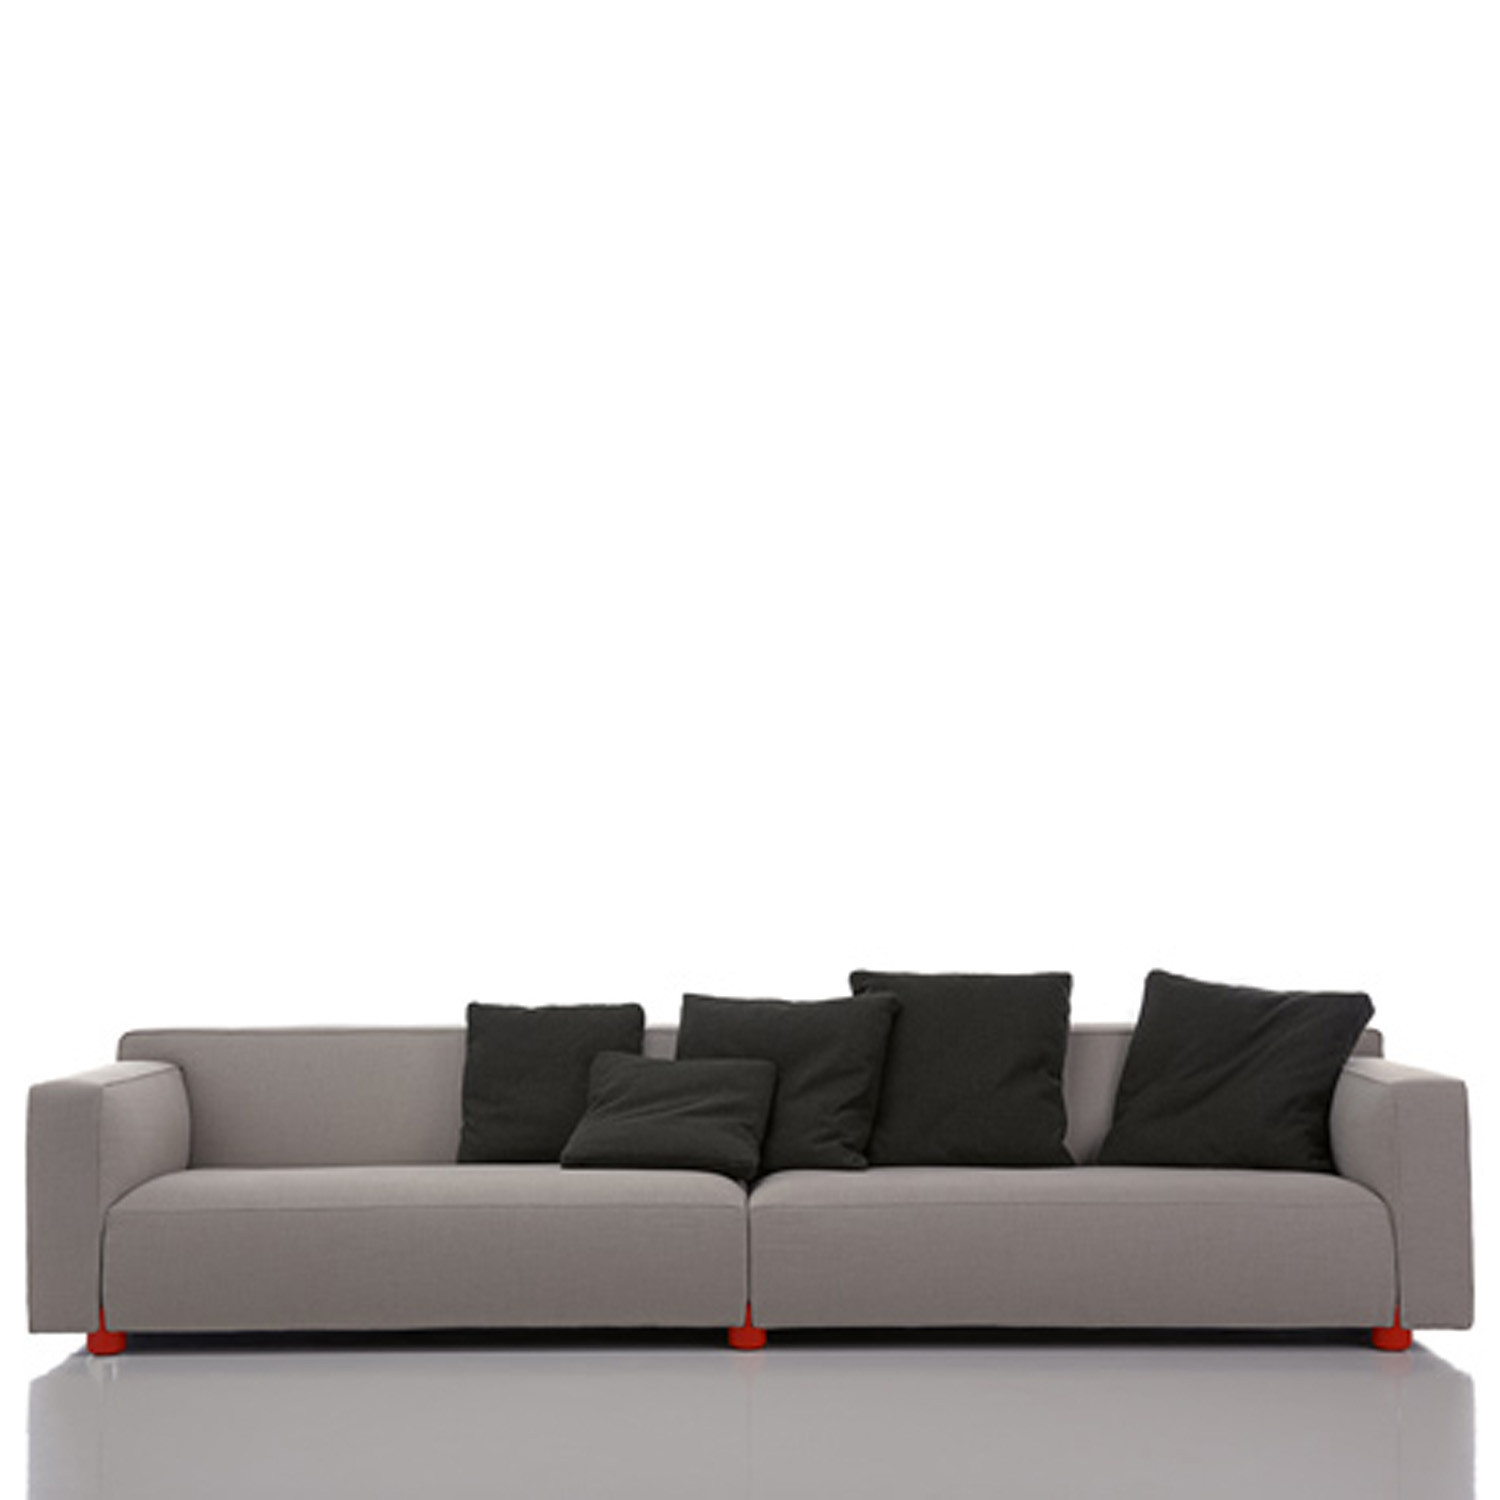 BarberOsgerby Sofa Collection